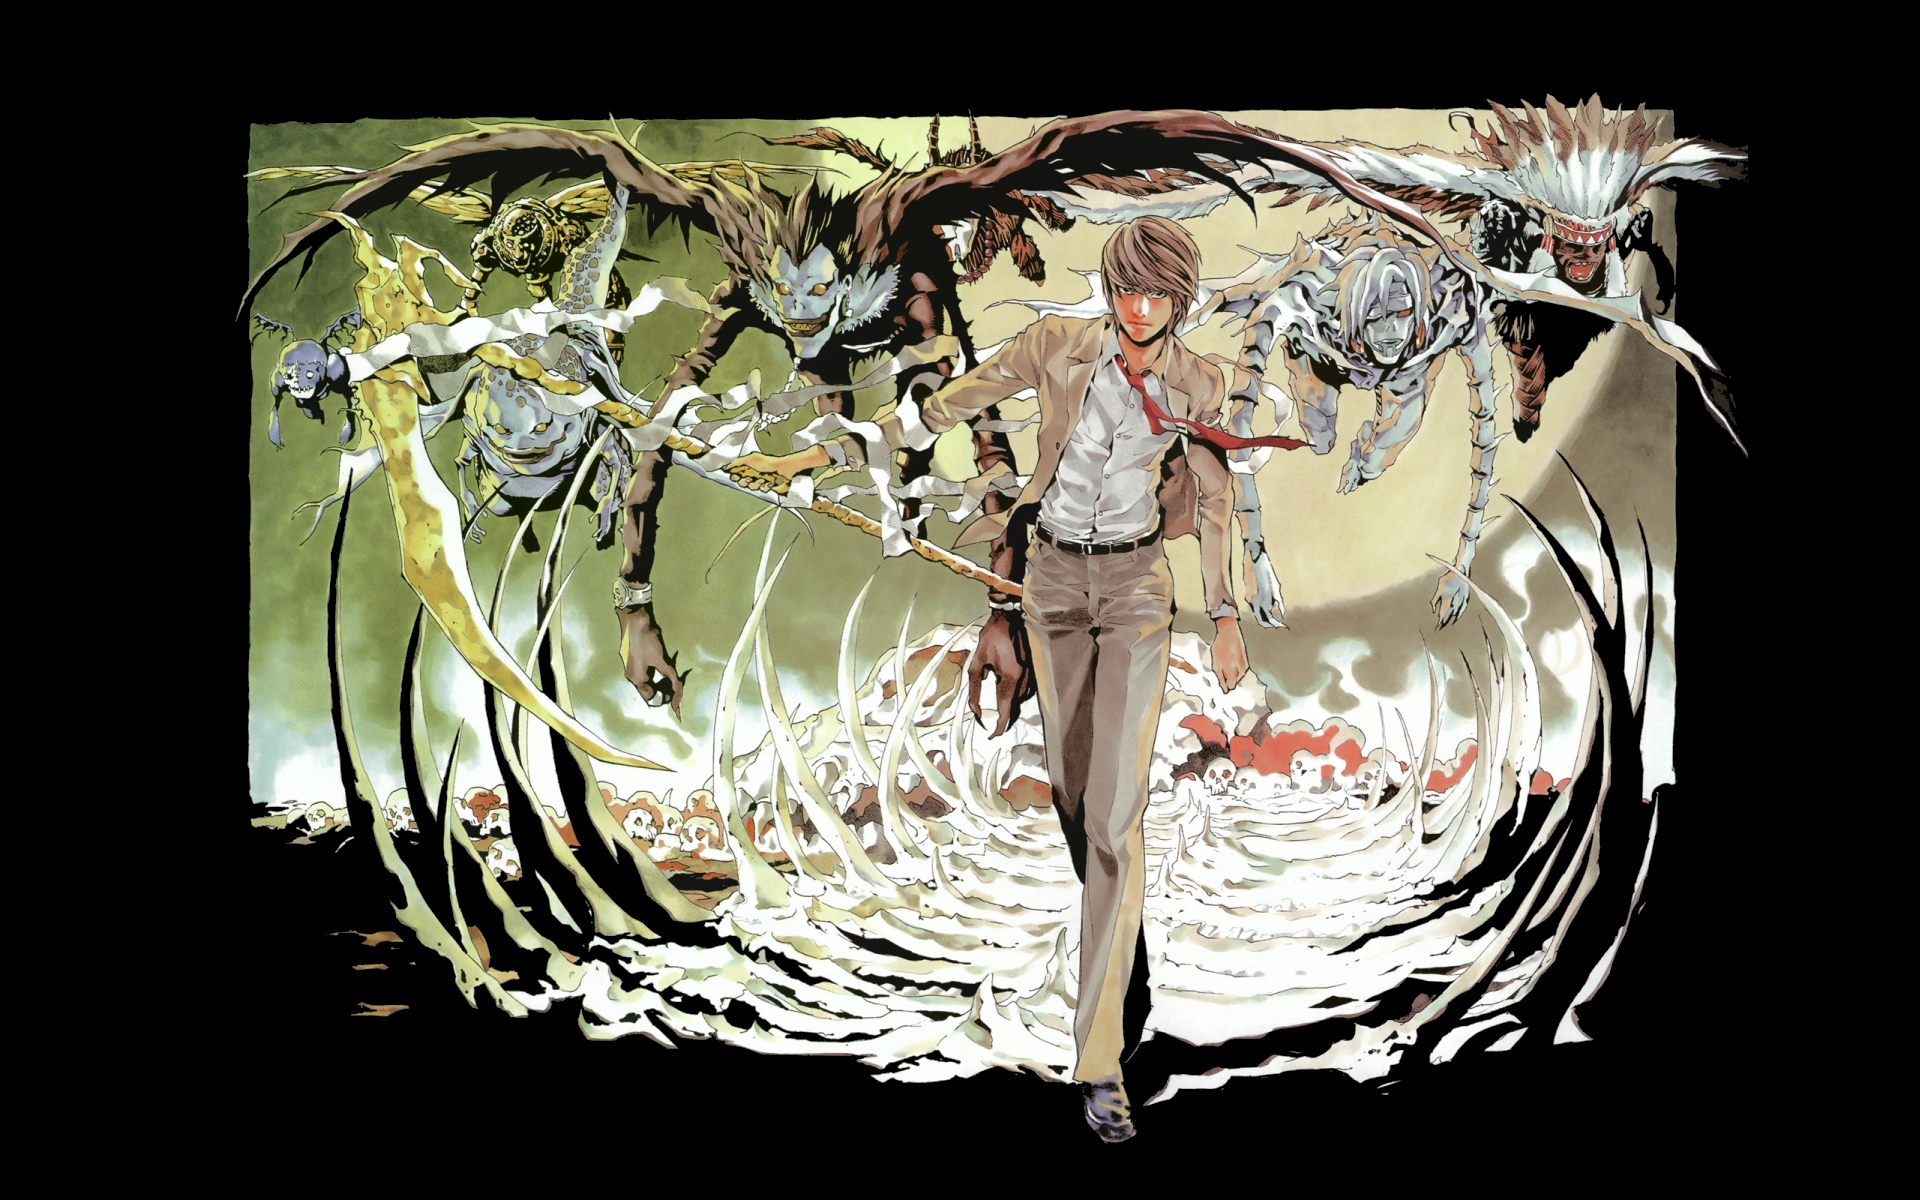 Anime wallpaper featuring Light Yagami from Death Note series